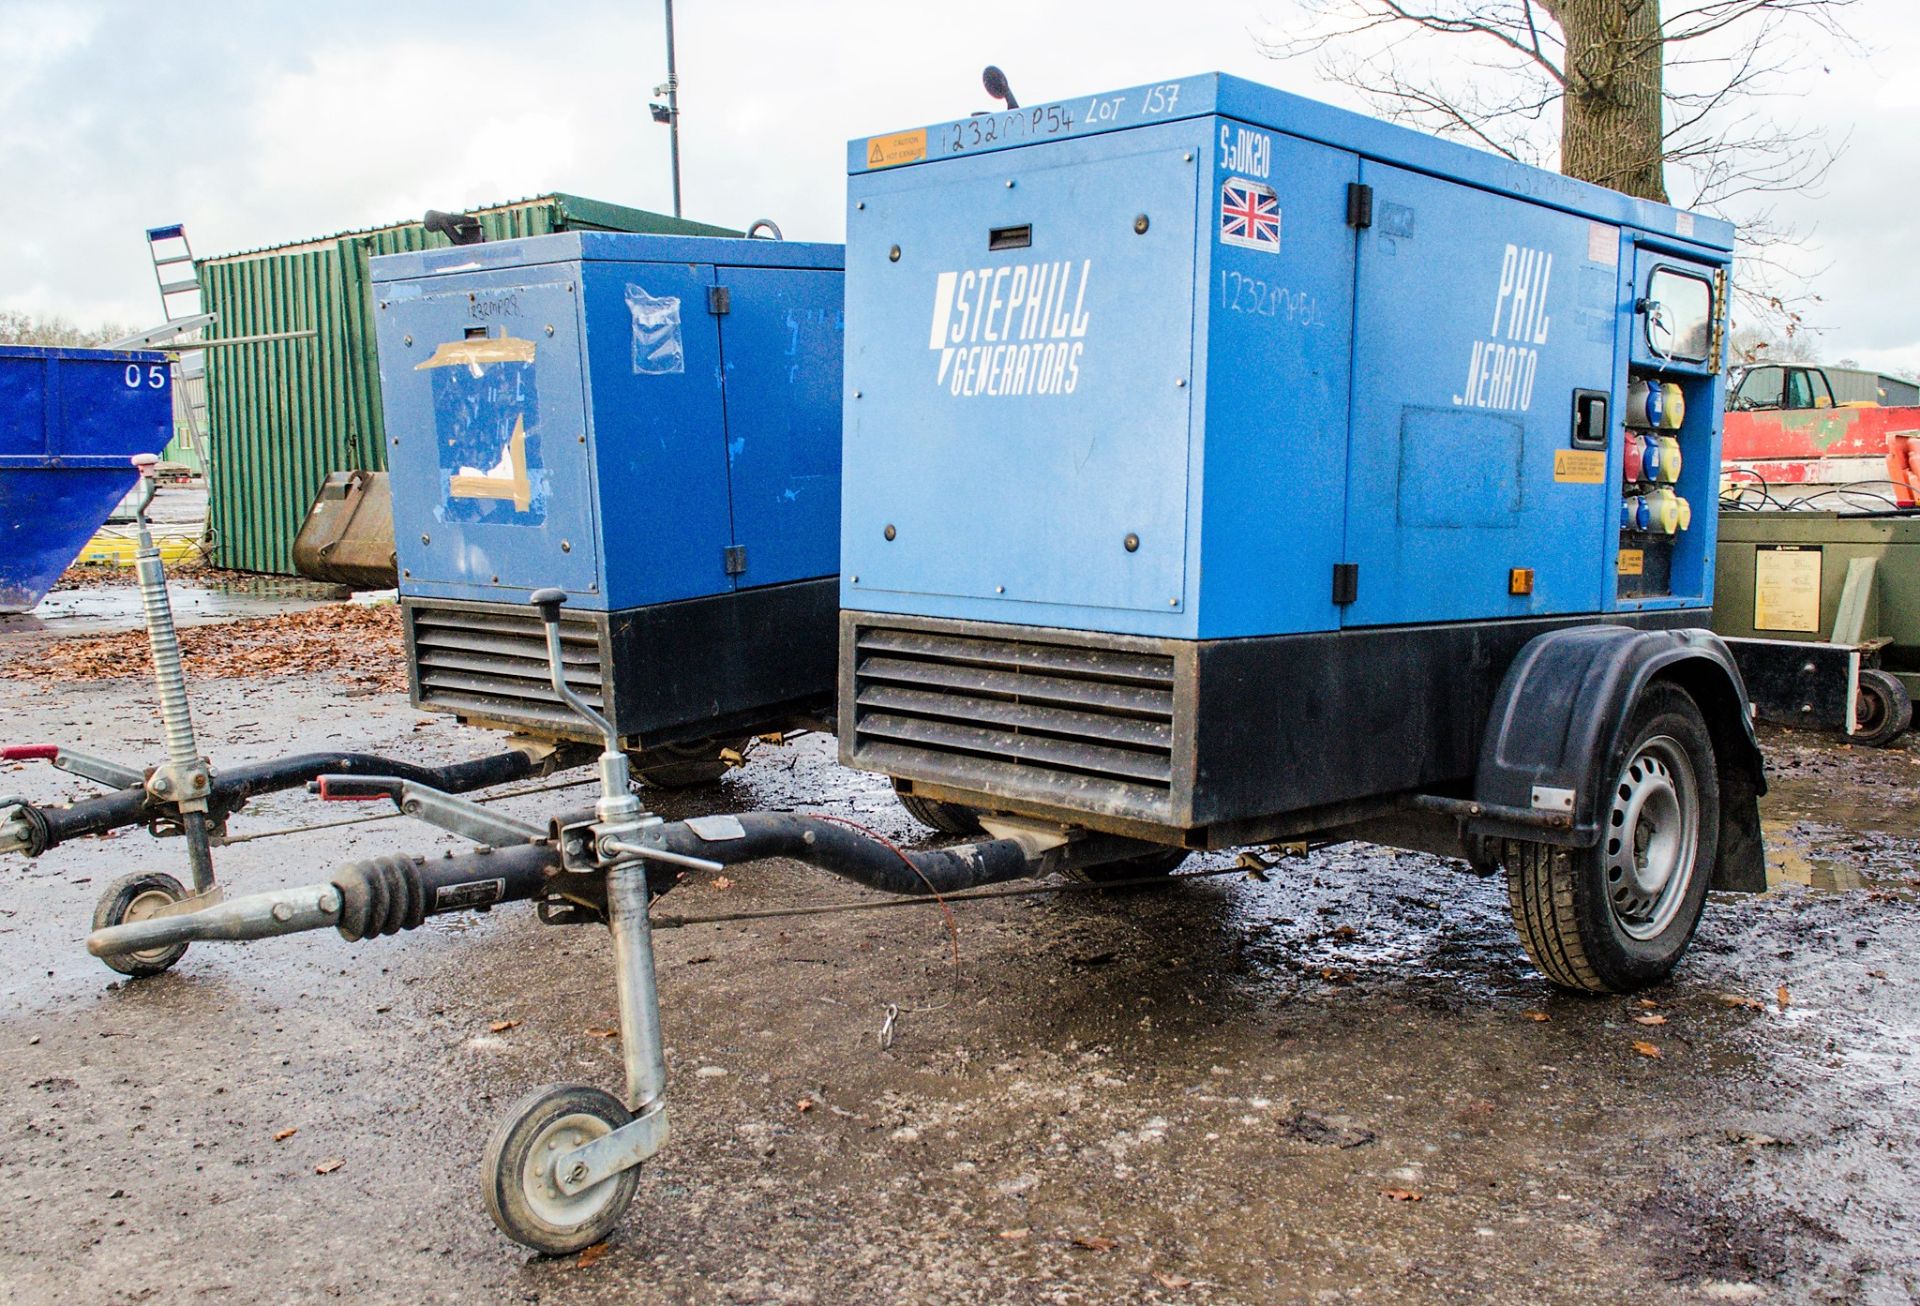 Stephill SSDK20 20 kva diesel driven fast tow generator Year: 2014 S/N: 600474 Recorded Hours: